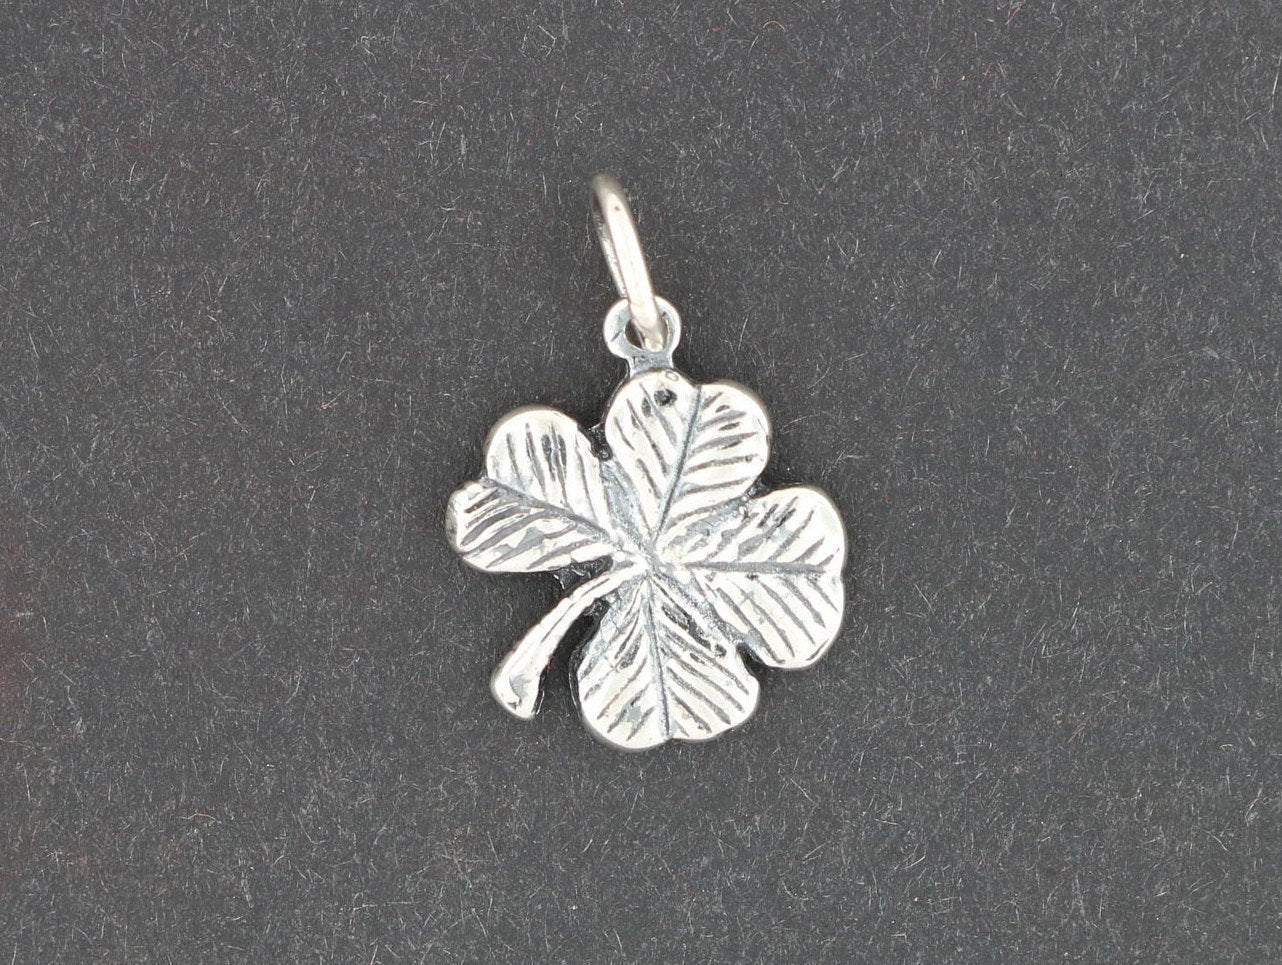 Small Four-Leaf Clover Charm in Sterling Silver or Antique Bronze, Sterling Silver Clover Pendant, Antique Bronze Clover Pendant, Lucky Clover Pendant, Lucky Charm Pendant, SIlver Four Leaf Clover, Bronze Four Leaf Clover, Silver Celtic Jewelry, Silver Celtic Jewellery, Bronze Celtic Jewelry, Bronze Celtic Jewellery, Silver Clover Charm, Bronze Clover Charm, Lucky Charm Jewelry, Lucky Charm Jewellery